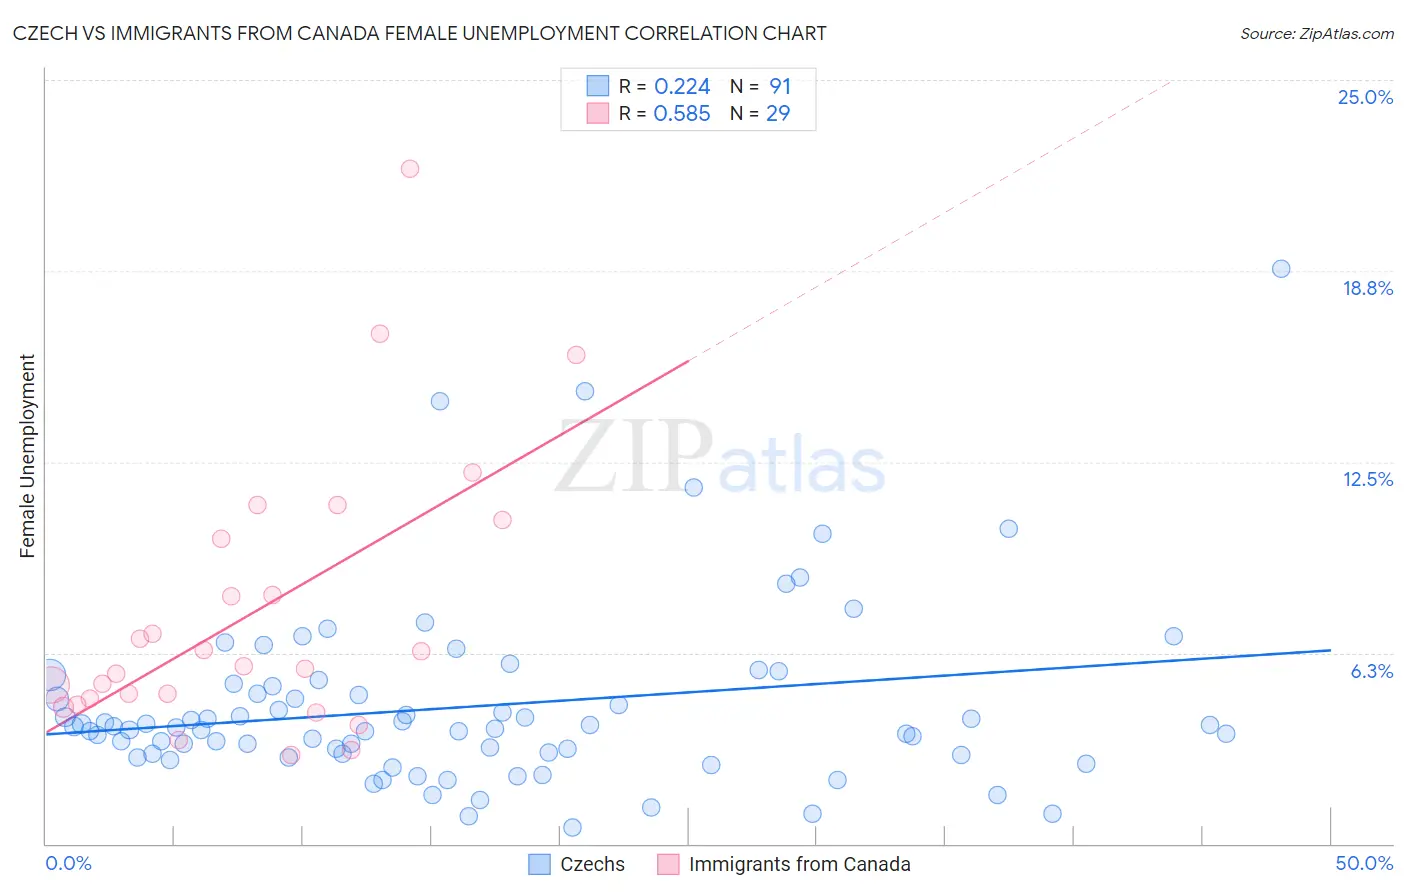 Czech vs Immigrants from Canada Female Unemployment